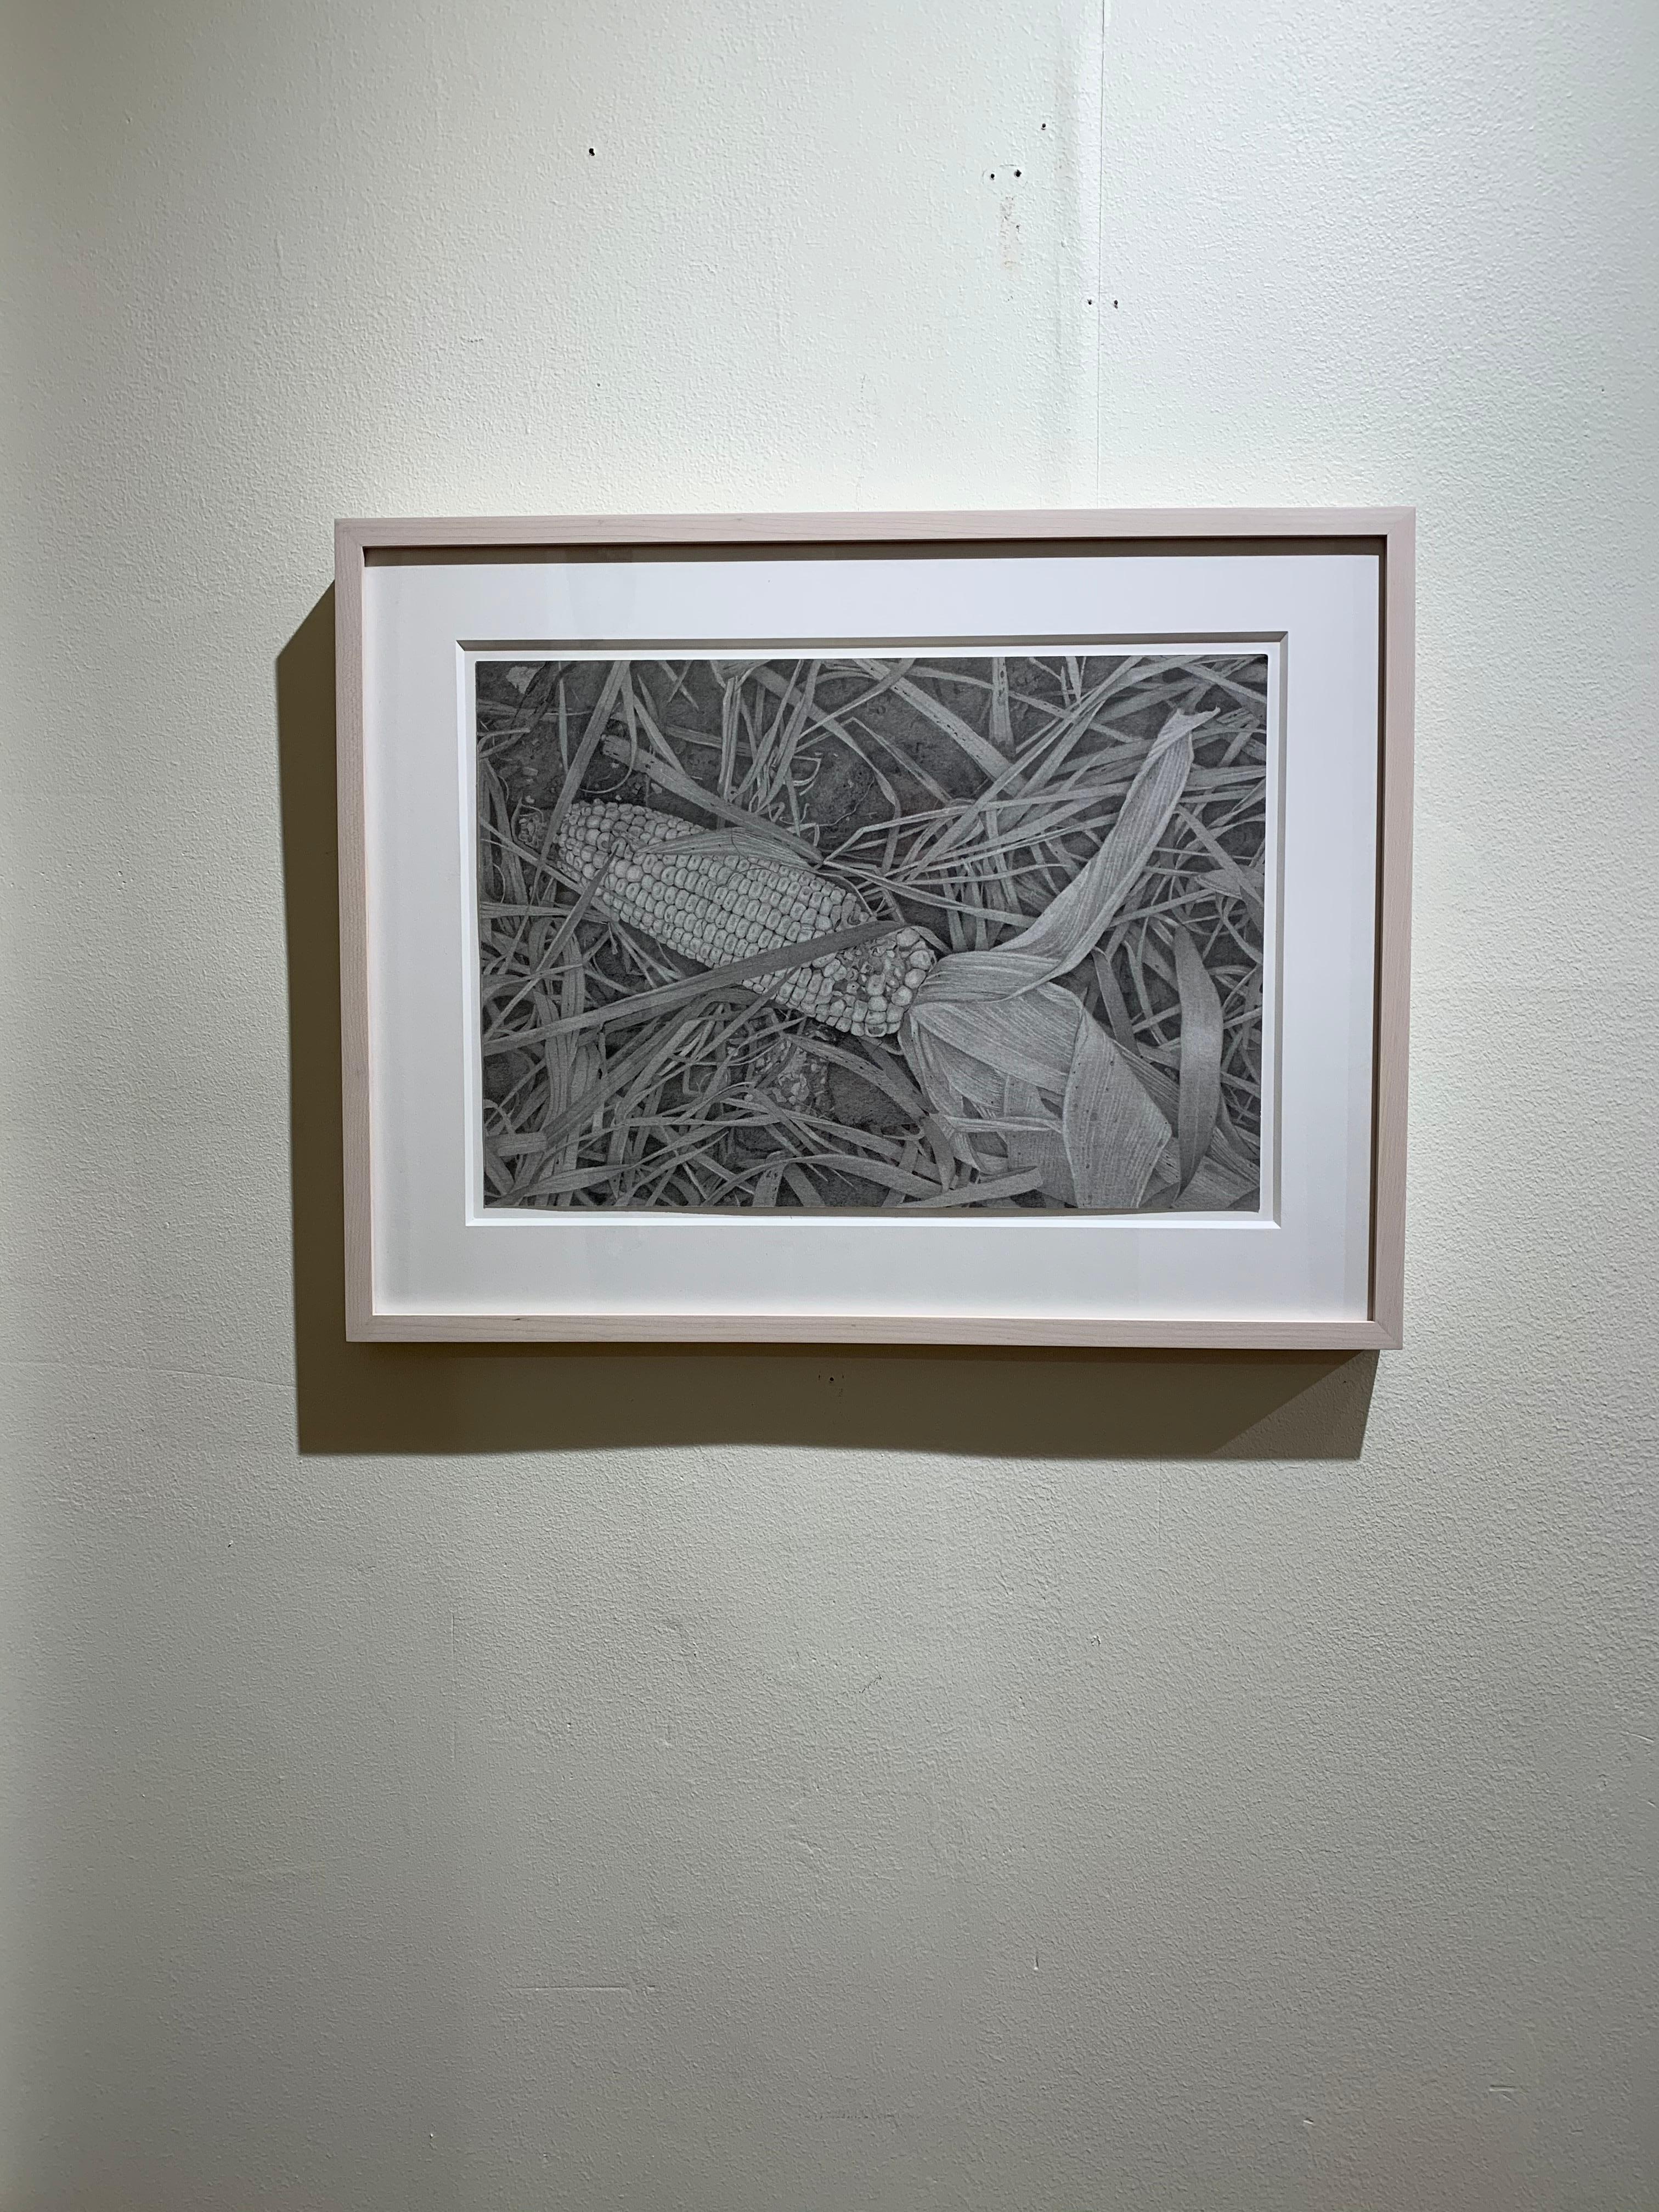 Corn Field 2, gray photorealist graphite still life drawing, 2019 - Art by Mary Reilly